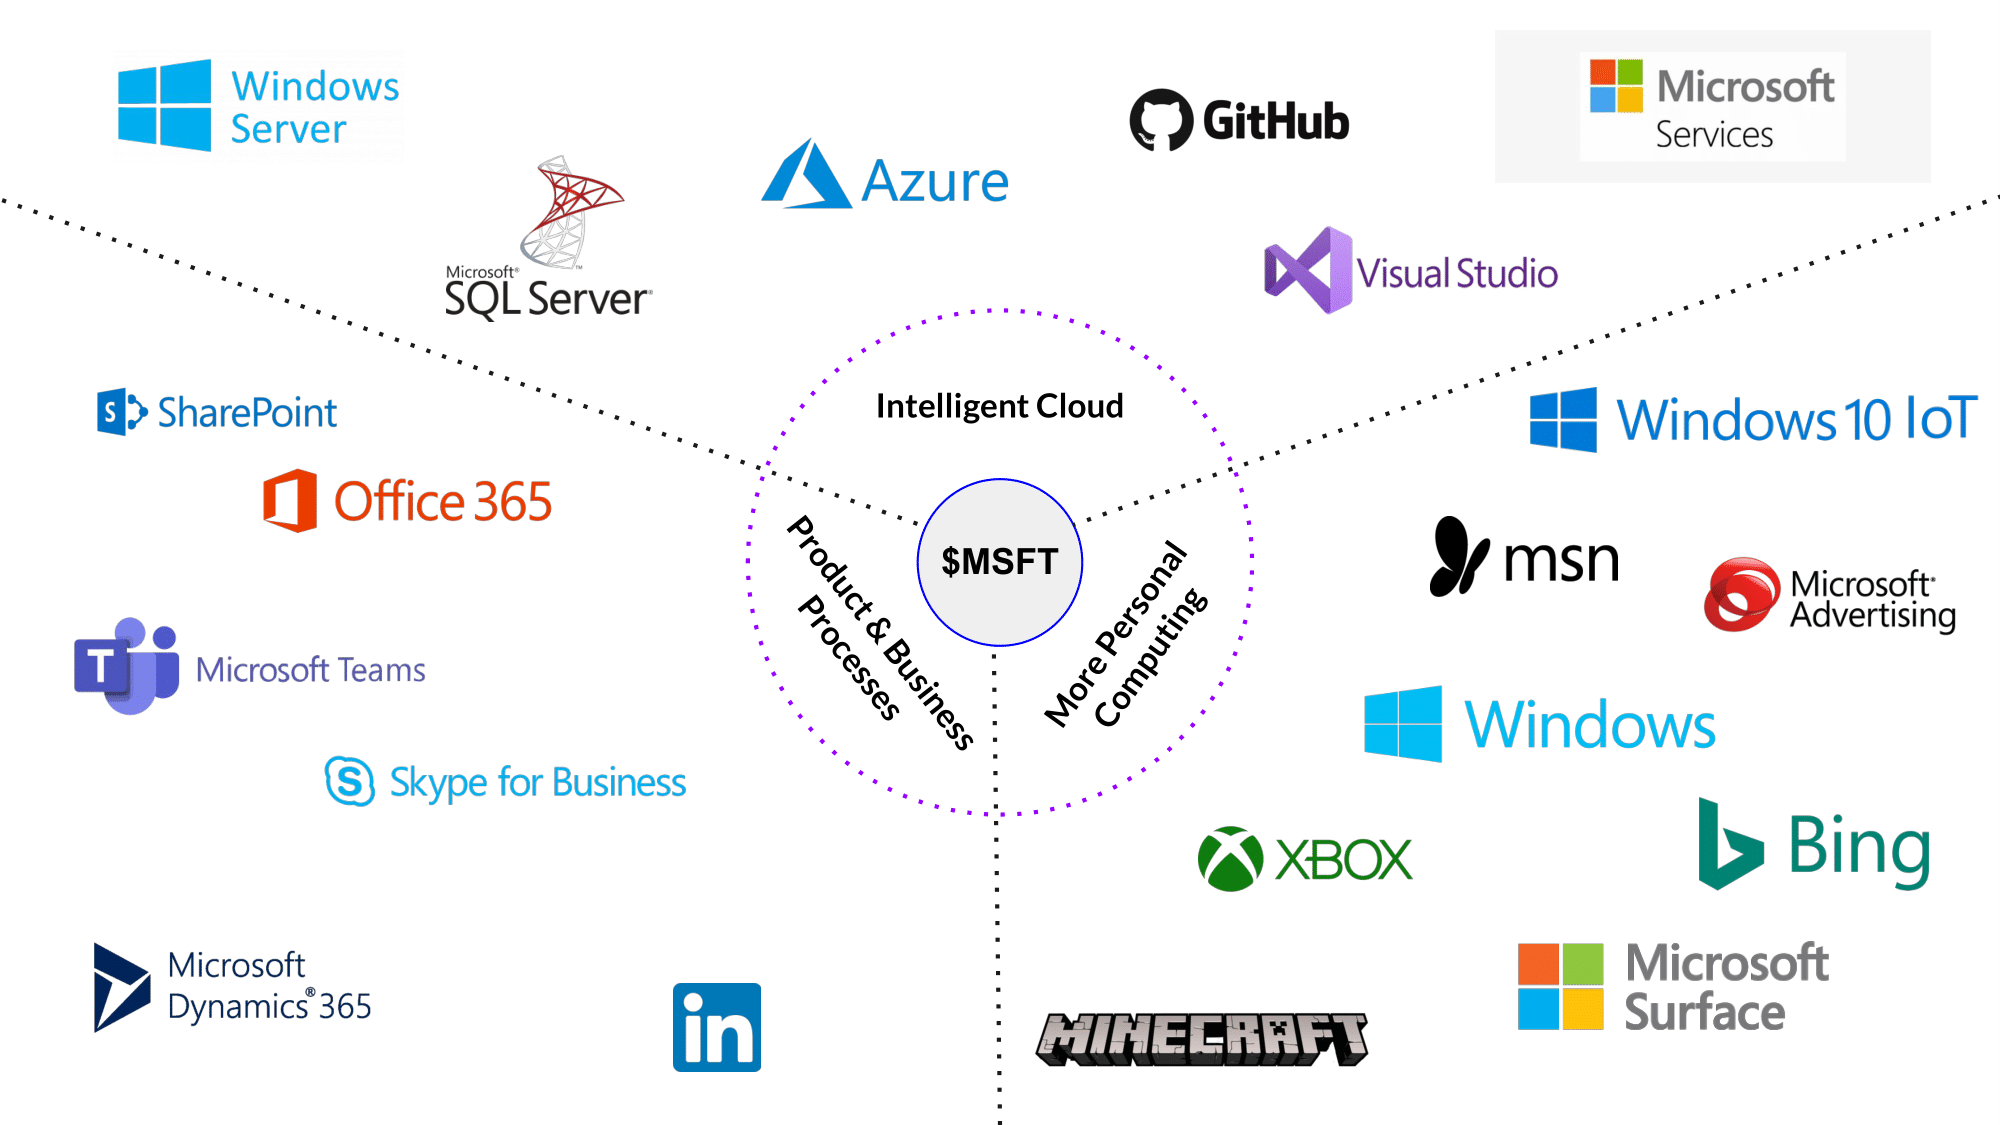 European Dividend Growth Investor on Twitter: Microsoft is a classic  textbook example of a company with a wide moat. Just look at the power of  their product line up. No wonder almost